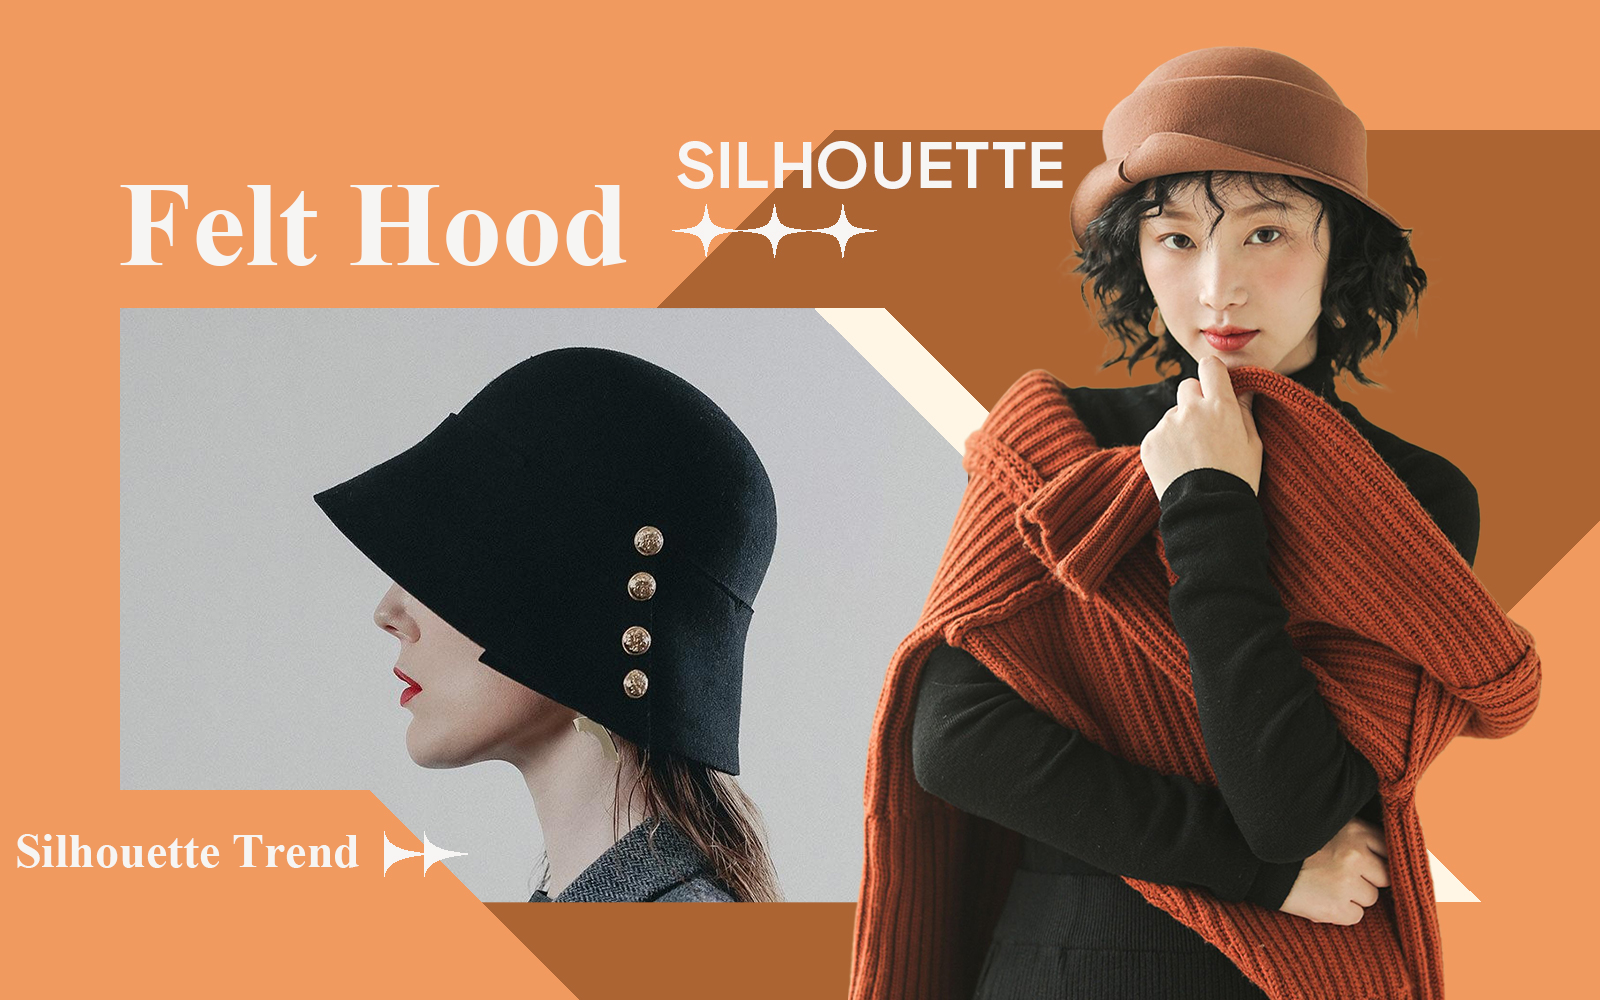 Fashion and Elegance -- The Silhouette Trend for Felt Hat